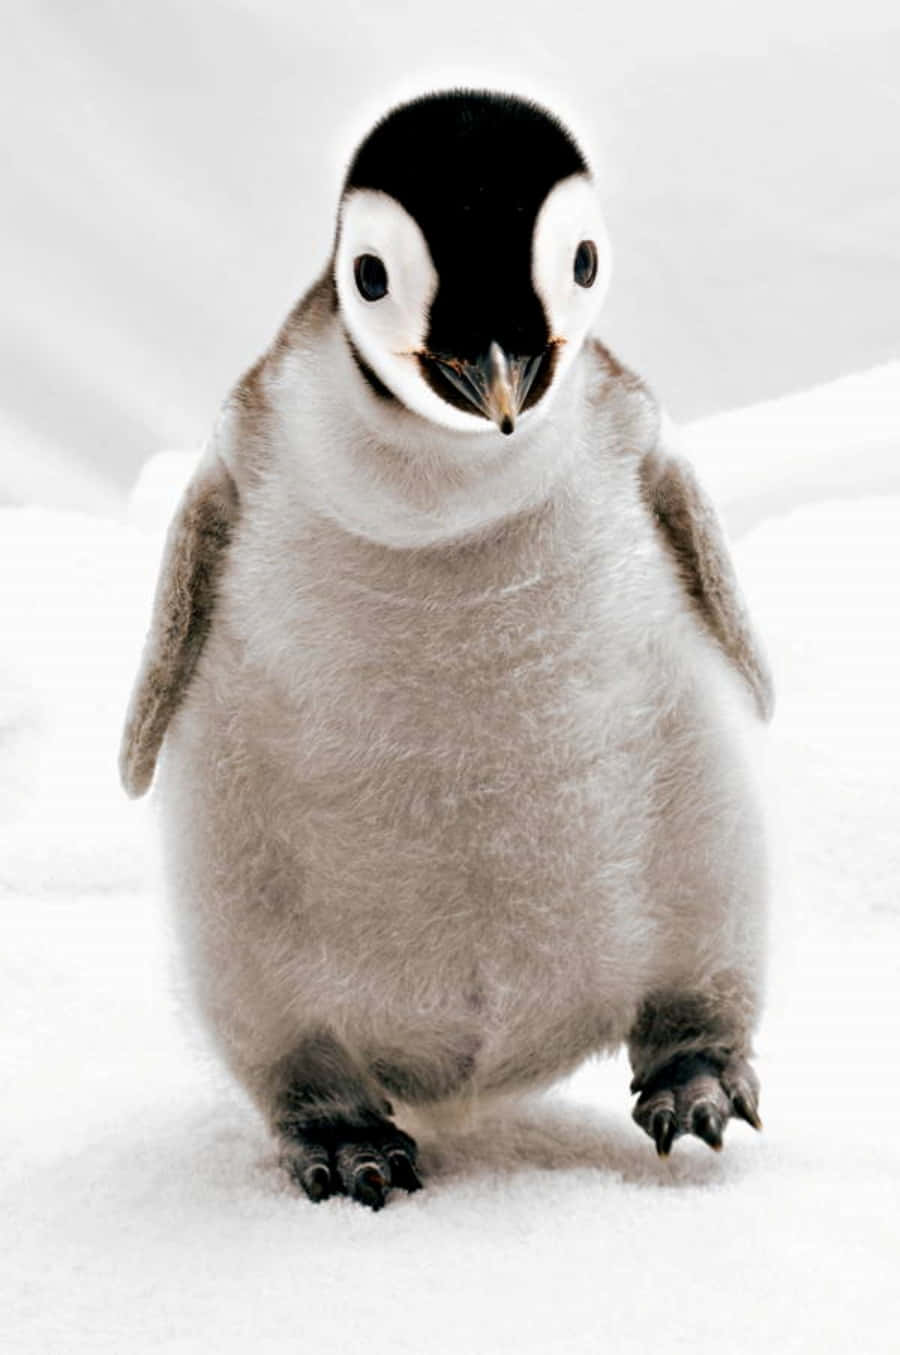 Adorable baby penguin looking for a hug